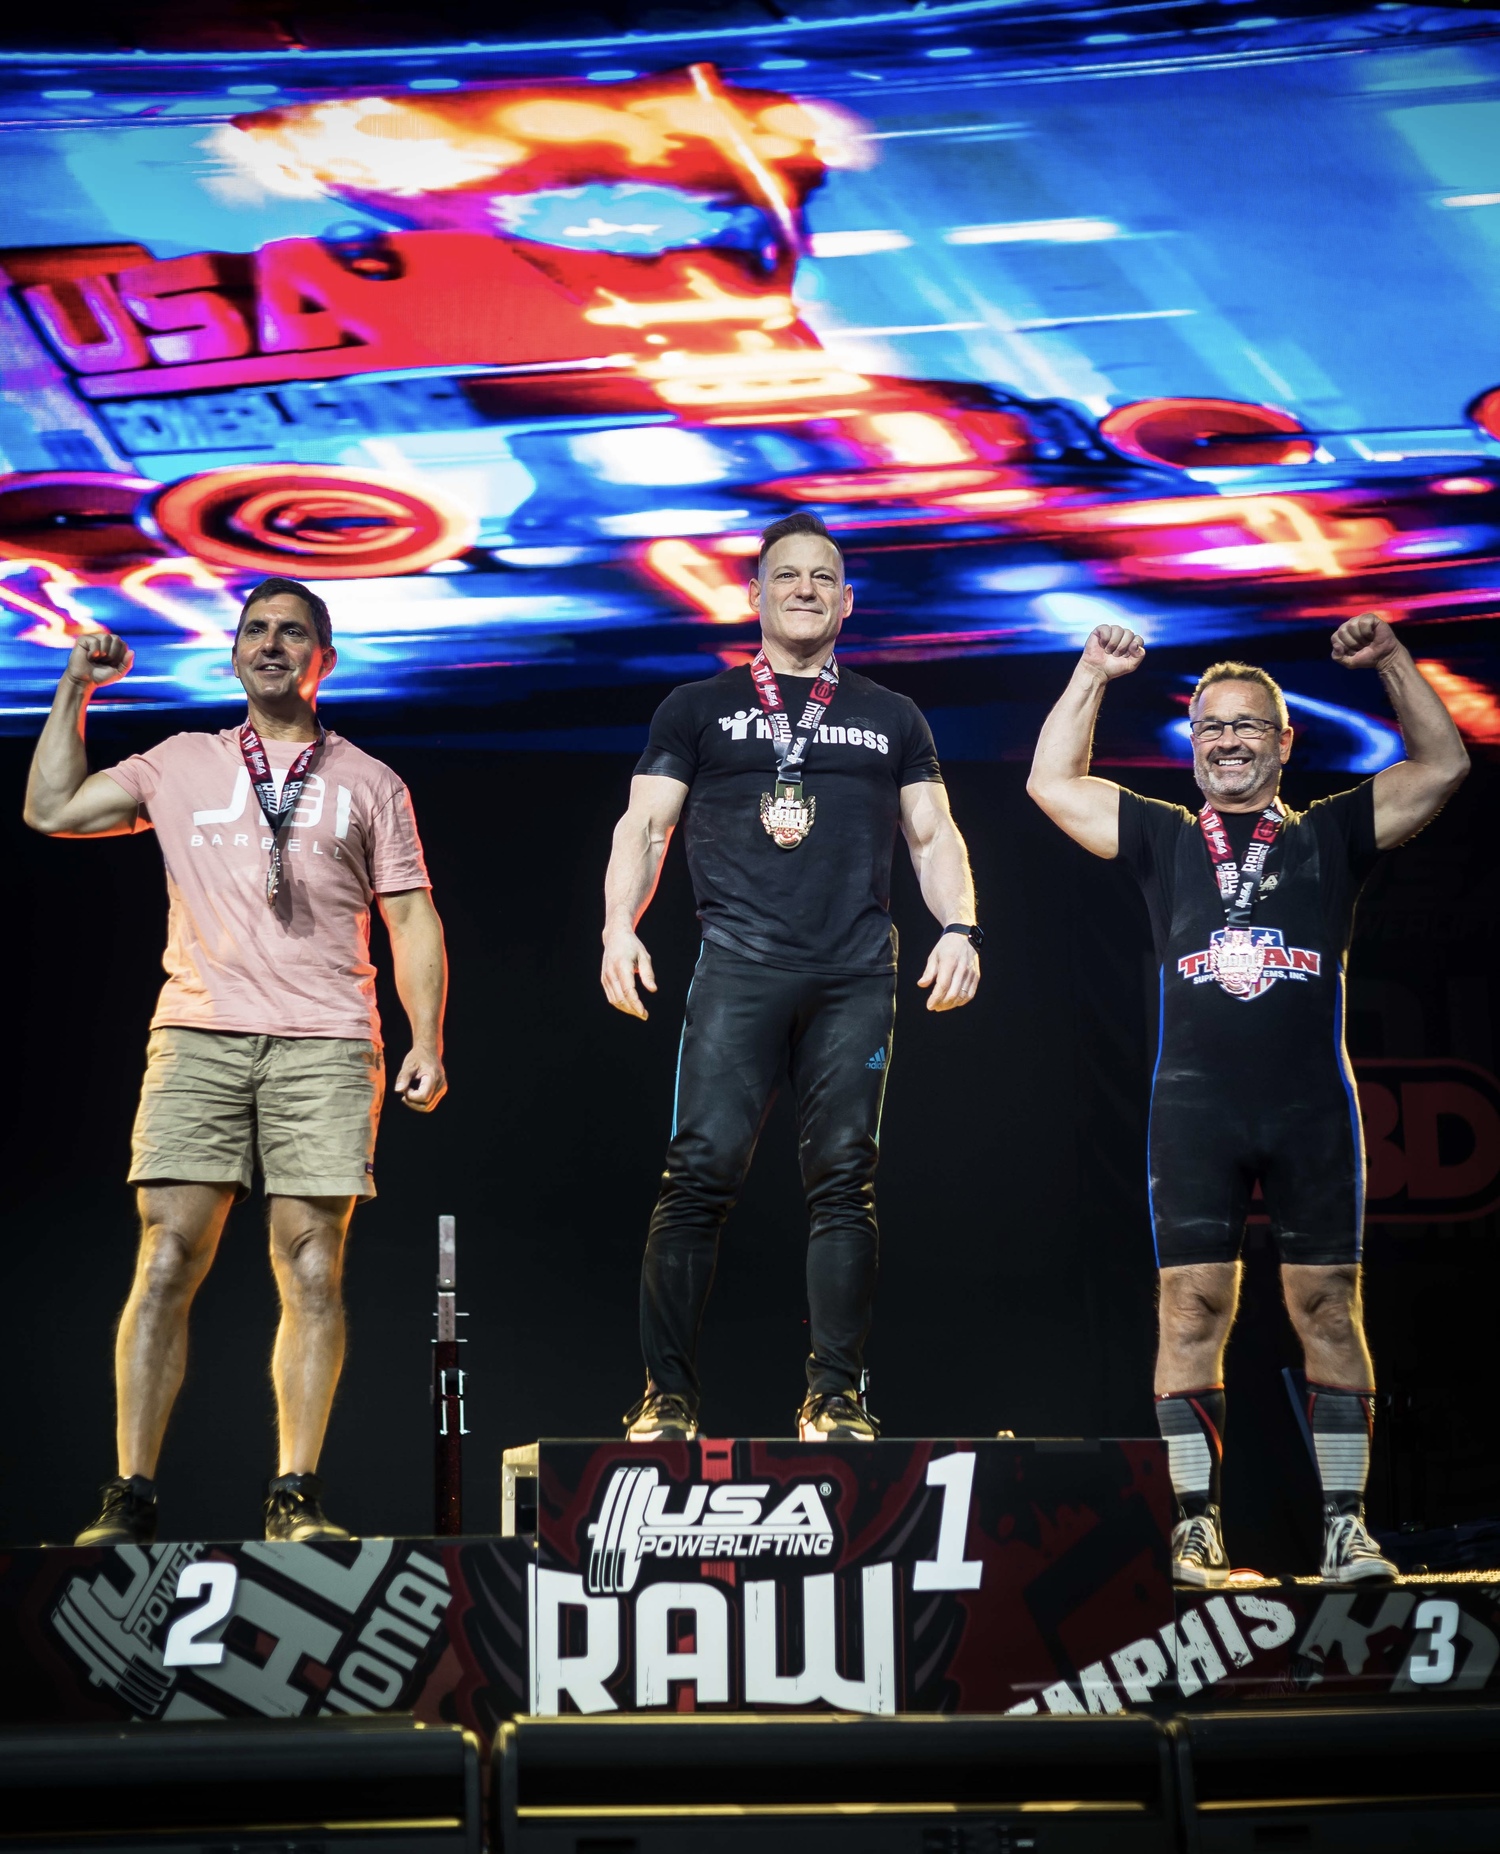 Mike Mayo Places Second at USA Powerlifting Nationals 27 East